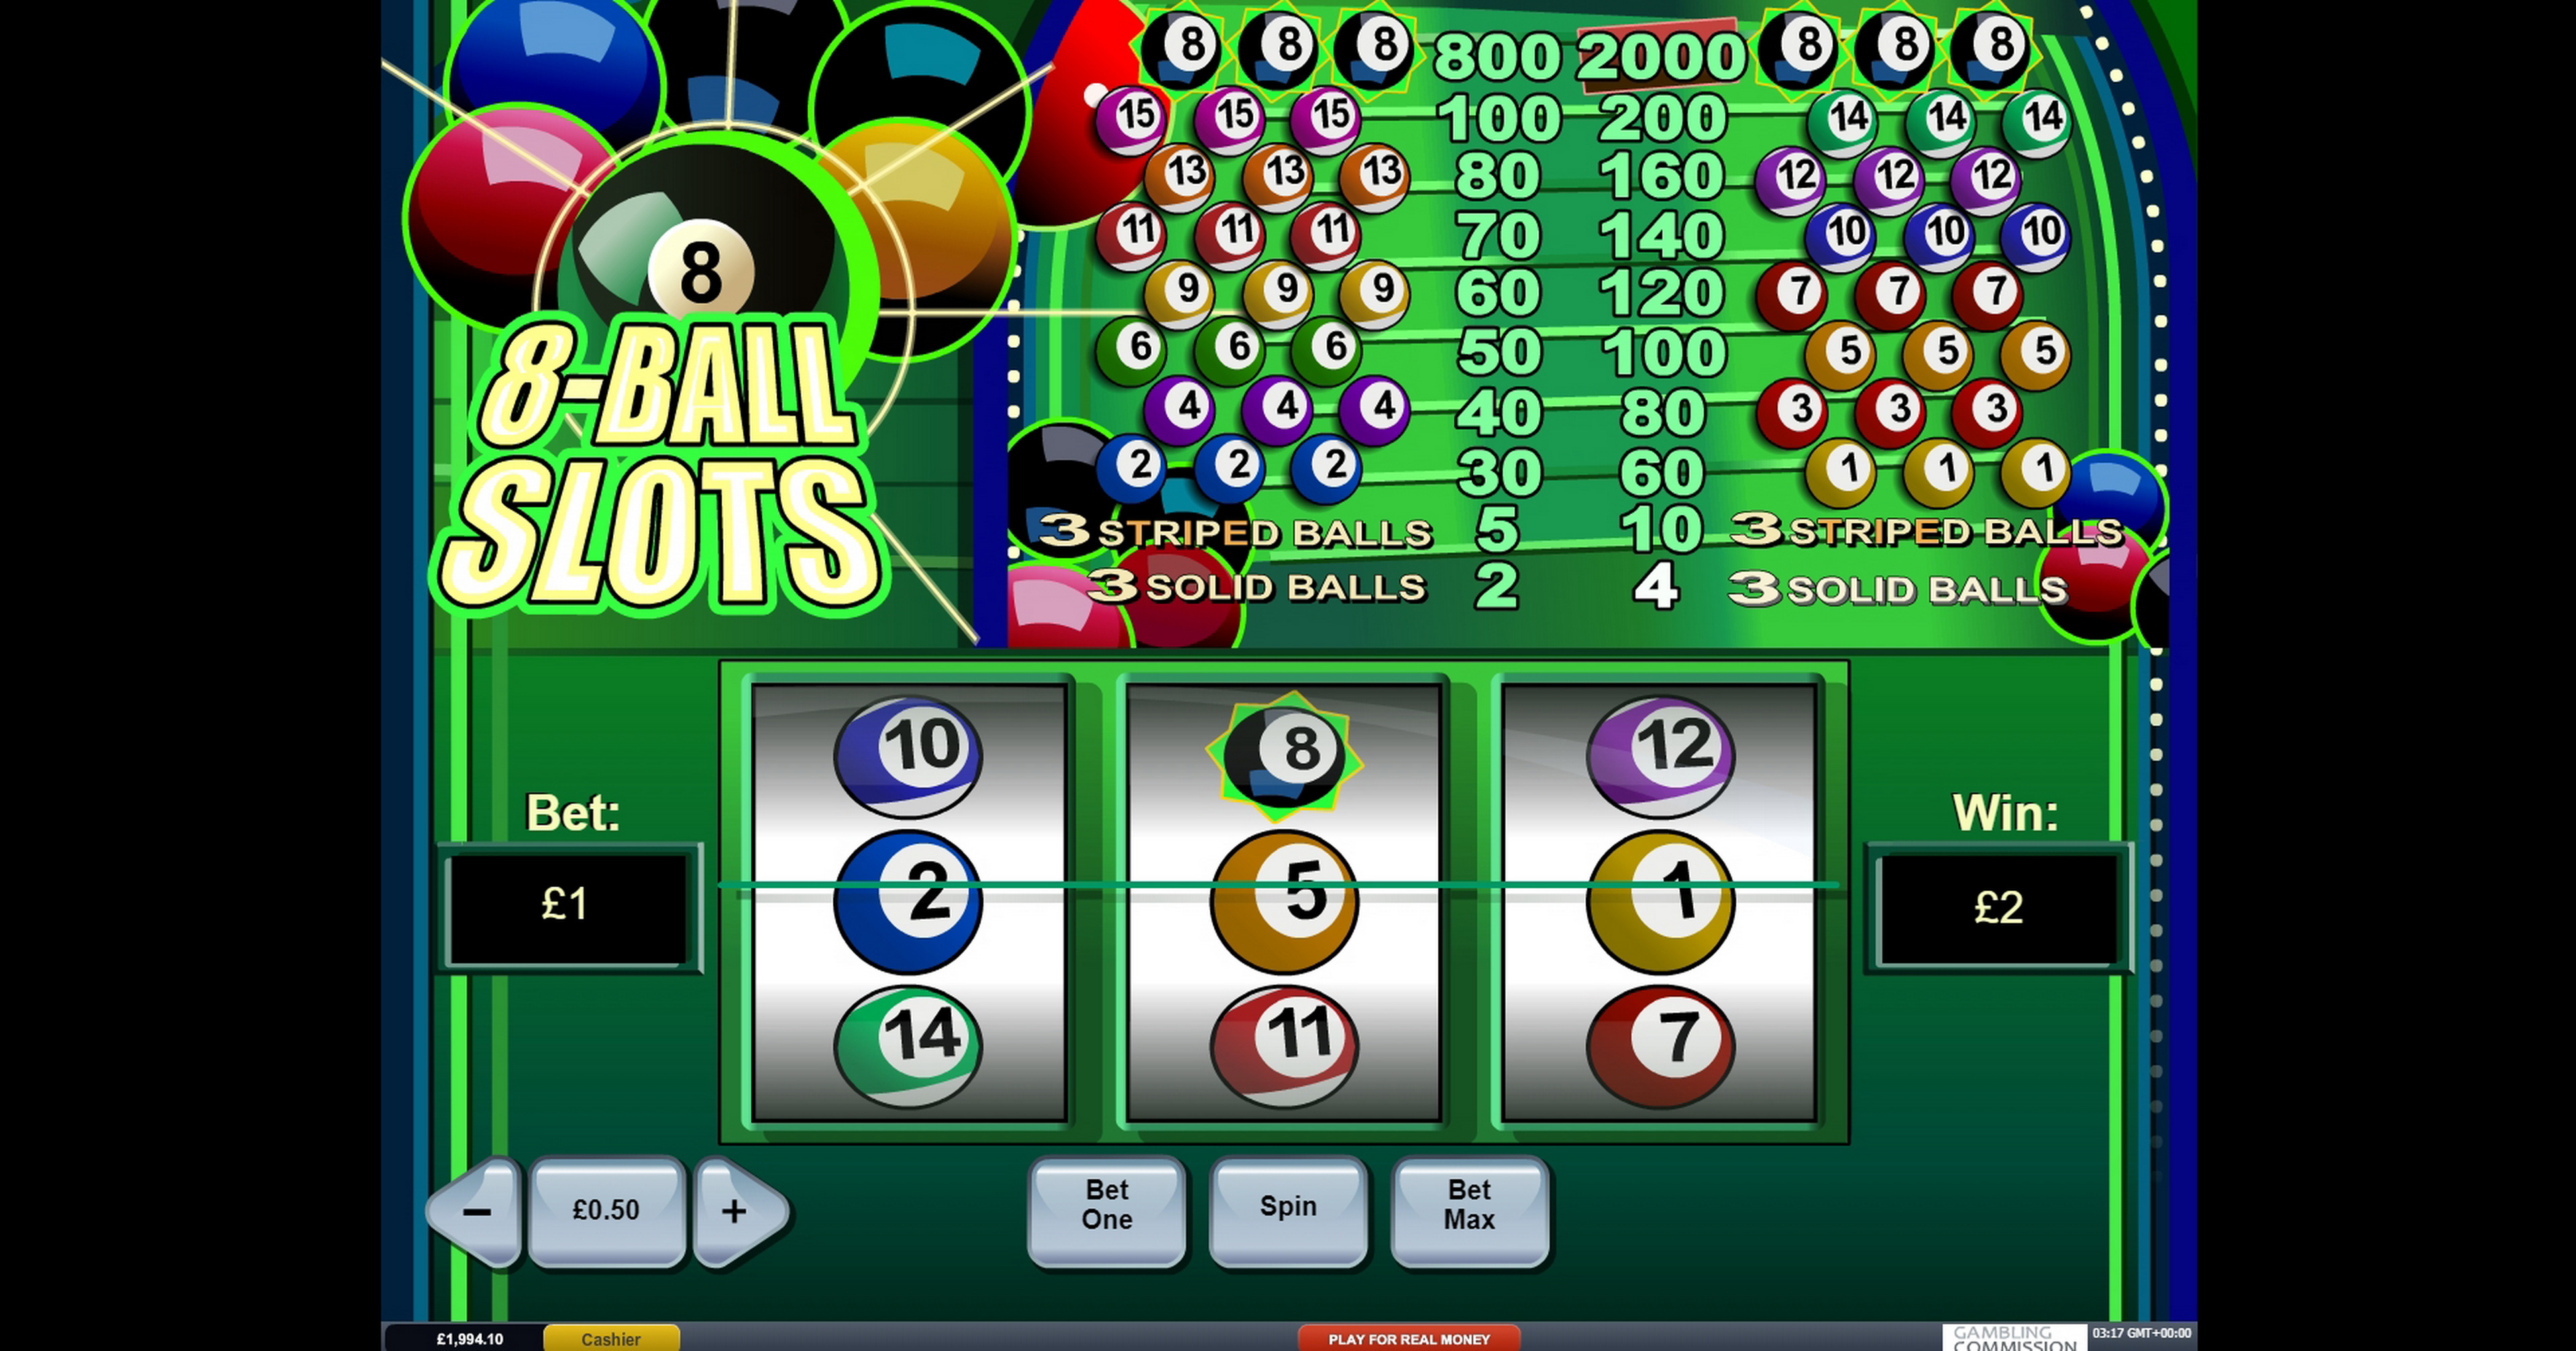 Win Money in 8 Ball Slots Free Slot Game by Playtech